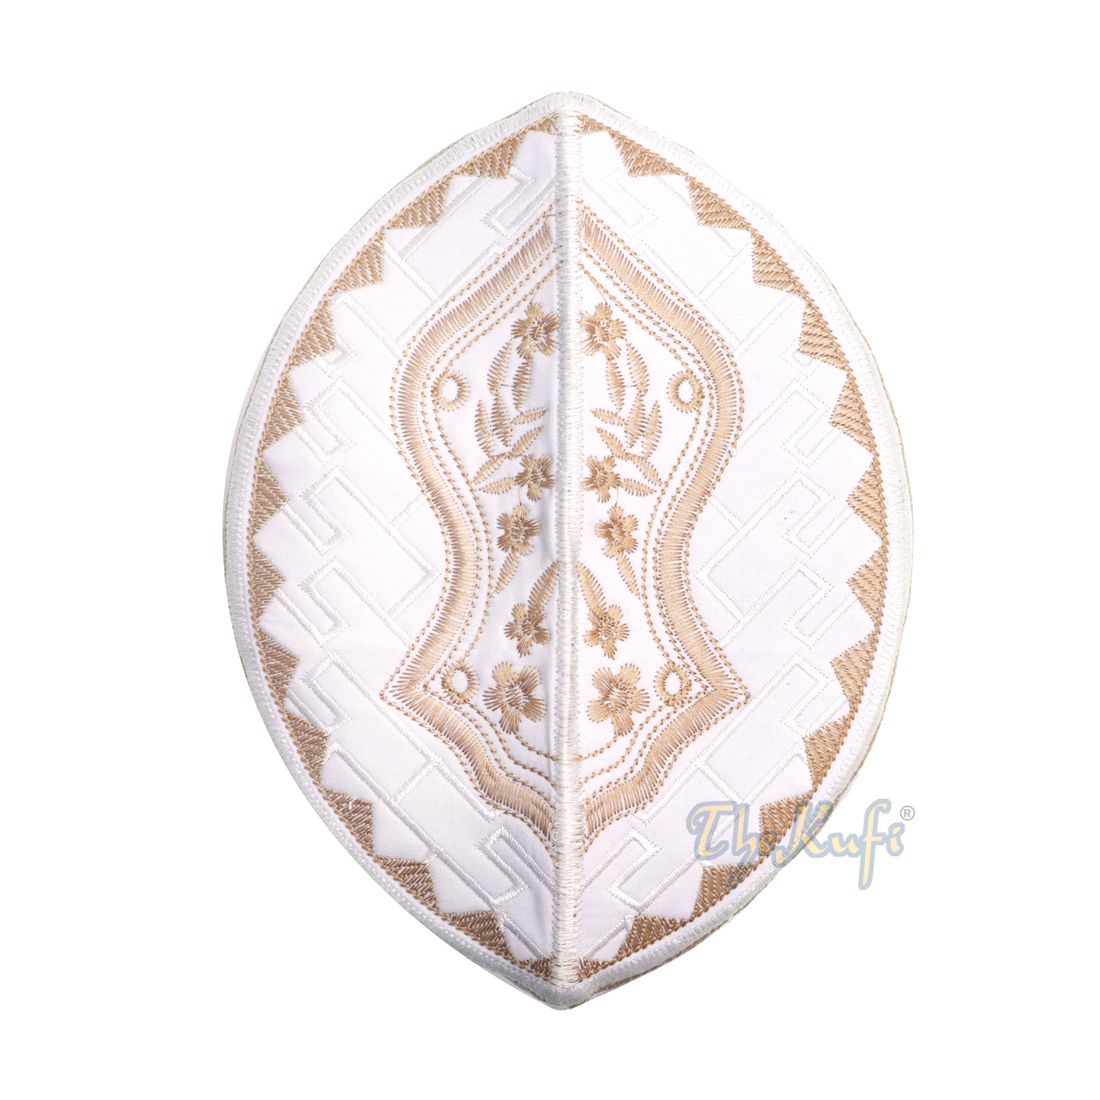 Textured White and Light Brown Embroidered Sandal Kufi Hat